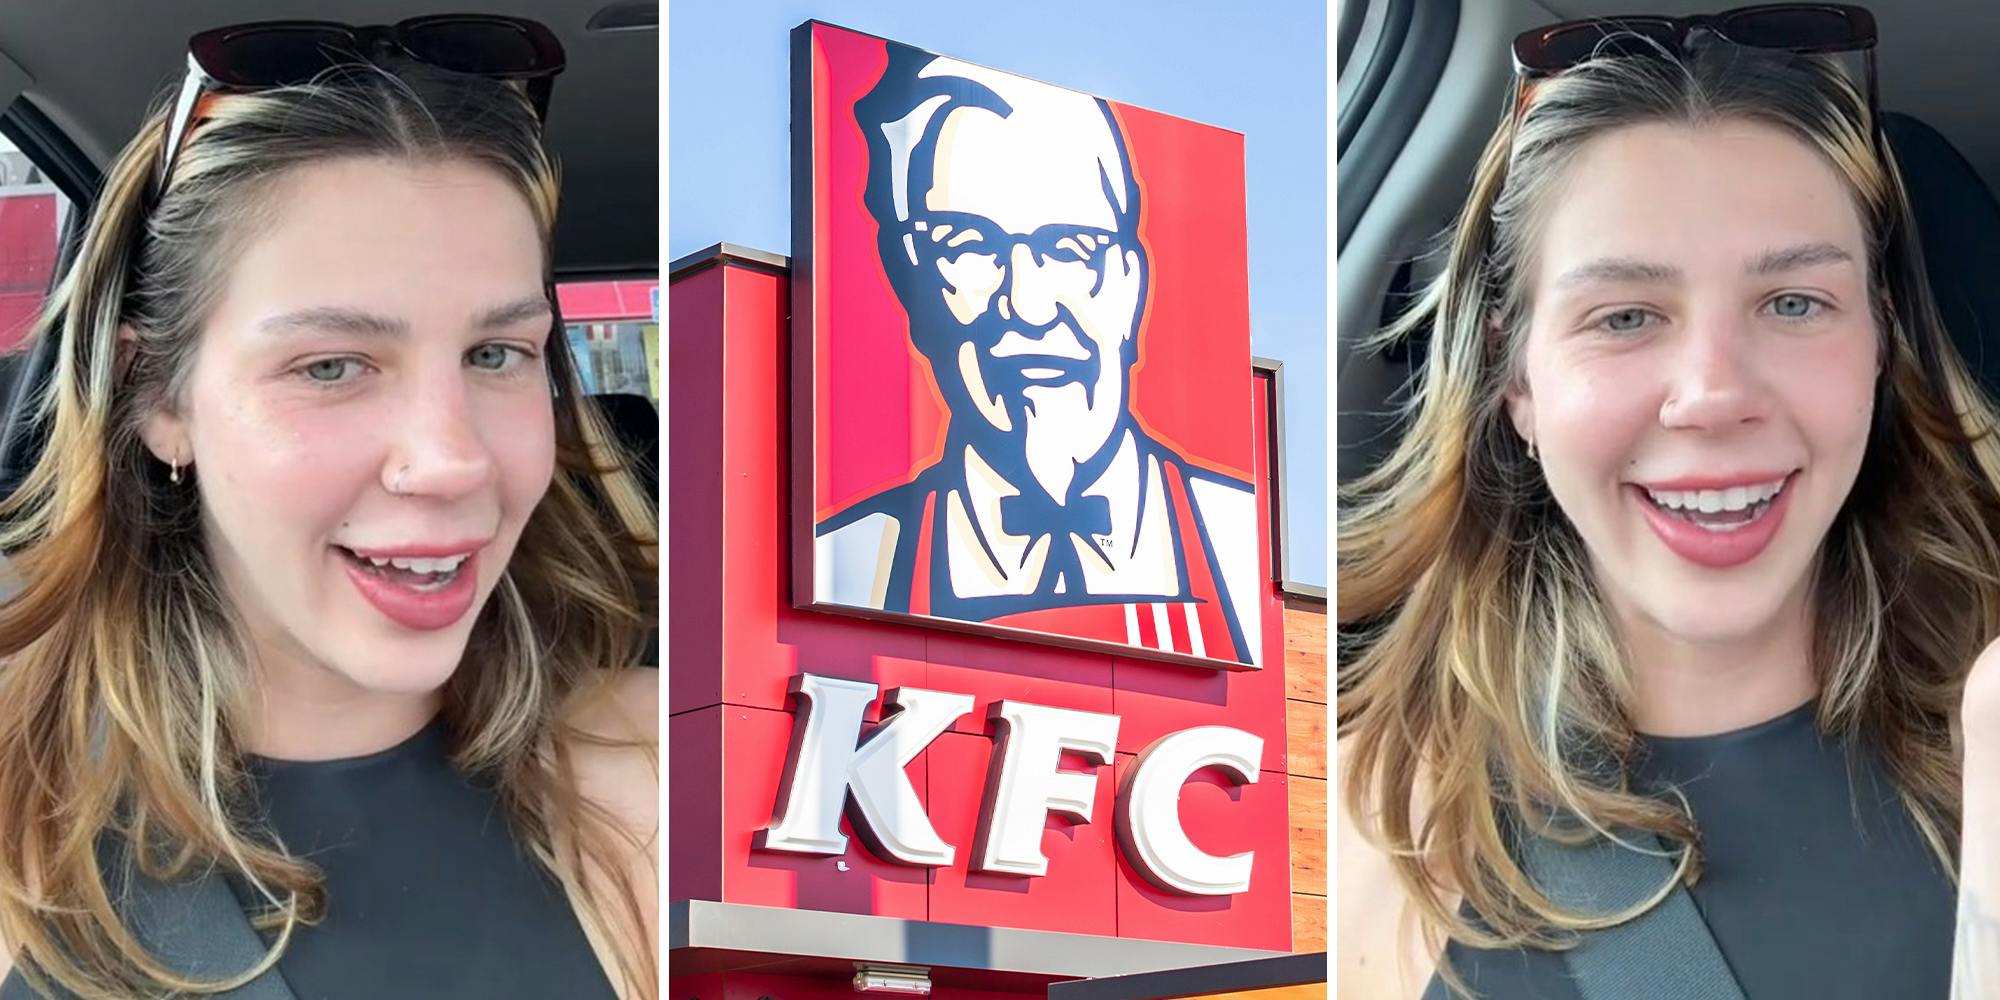 KFC customer says worker ‘bargained’ with her over the cost of her meal